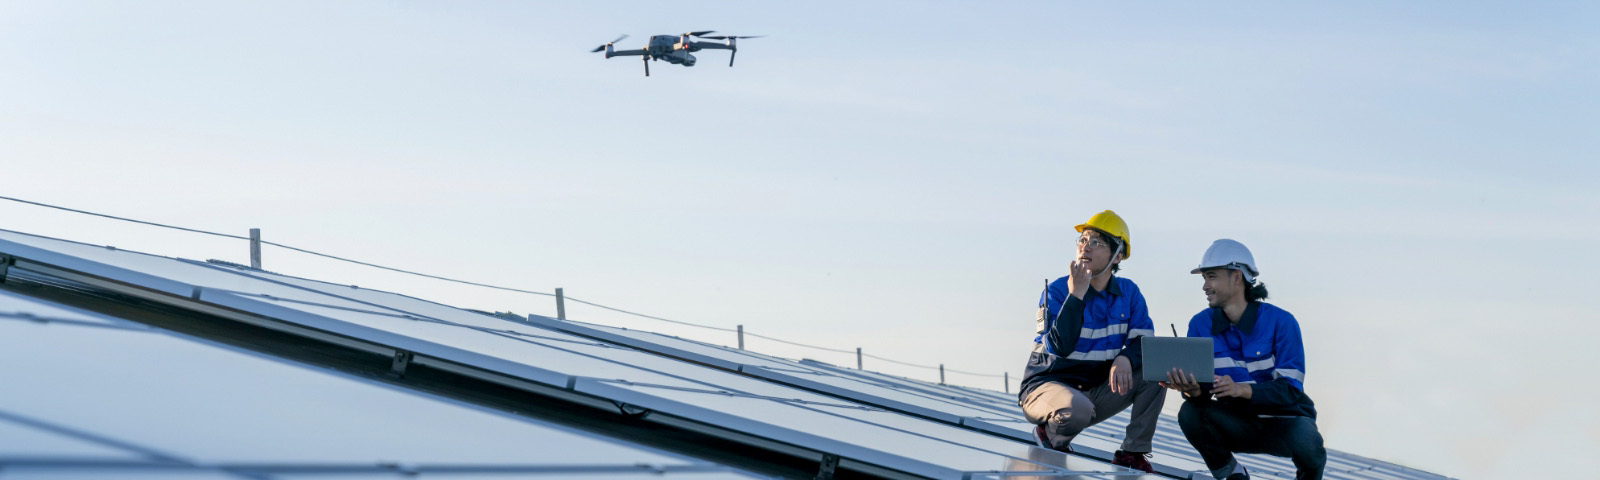 Two workers on a solar panel roof looking a drone